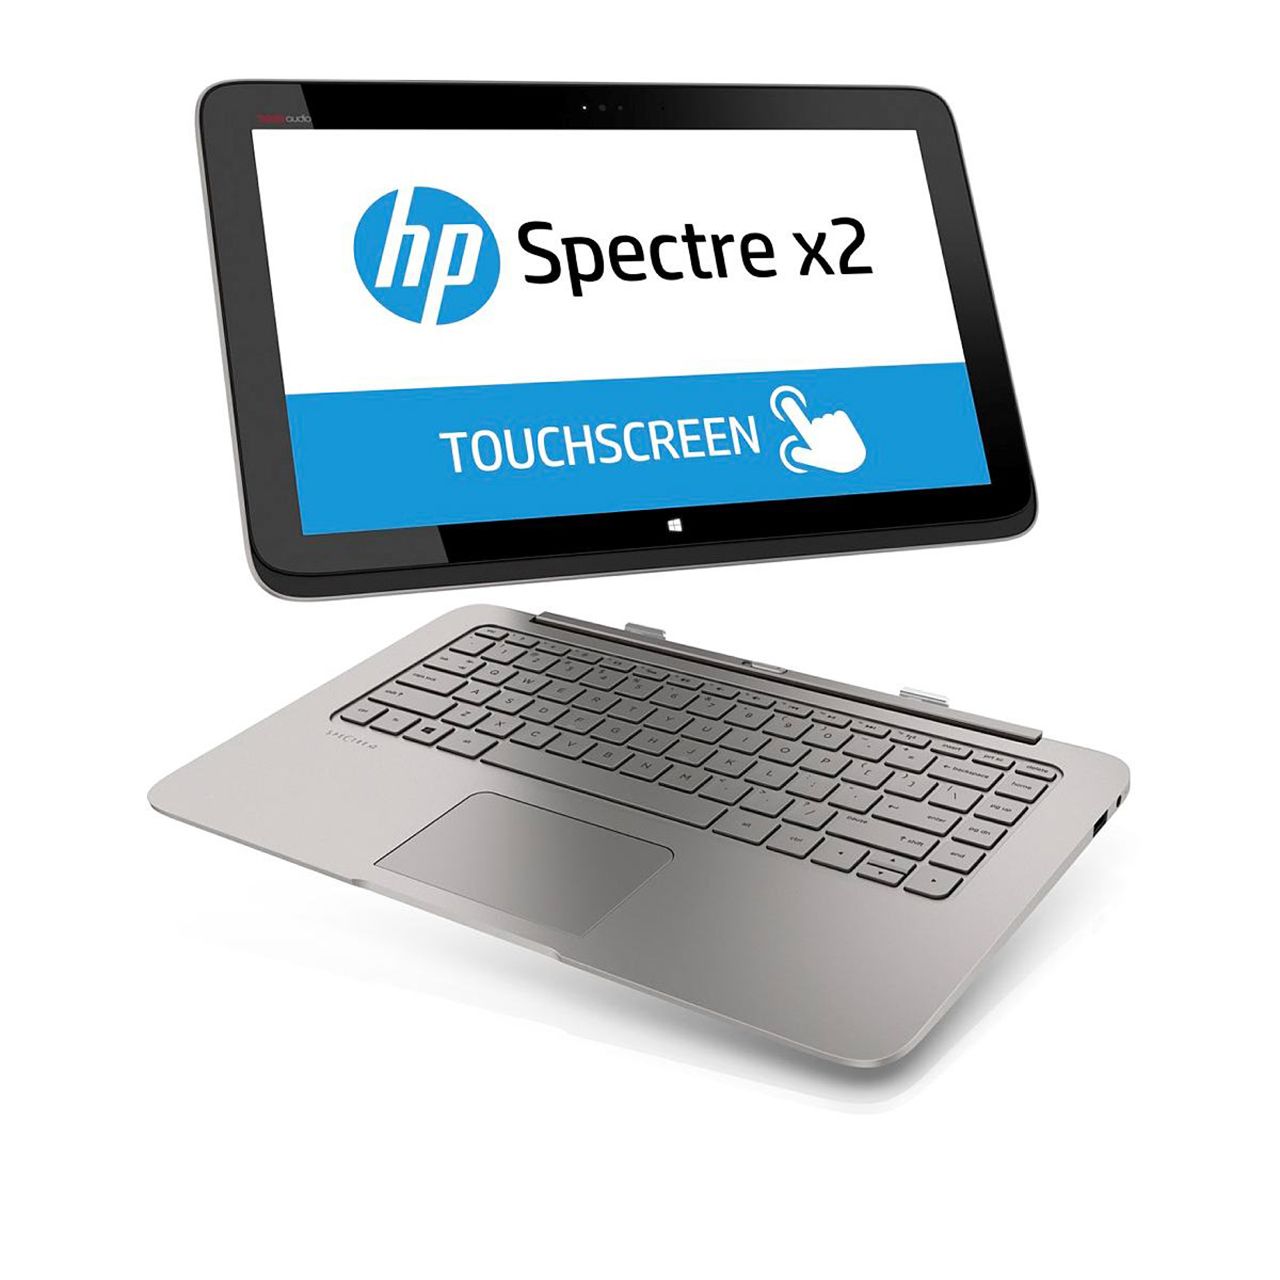 hp announces world first leap motion laptop and the first fanless ultrabook cum tablet with haswell innards image 2